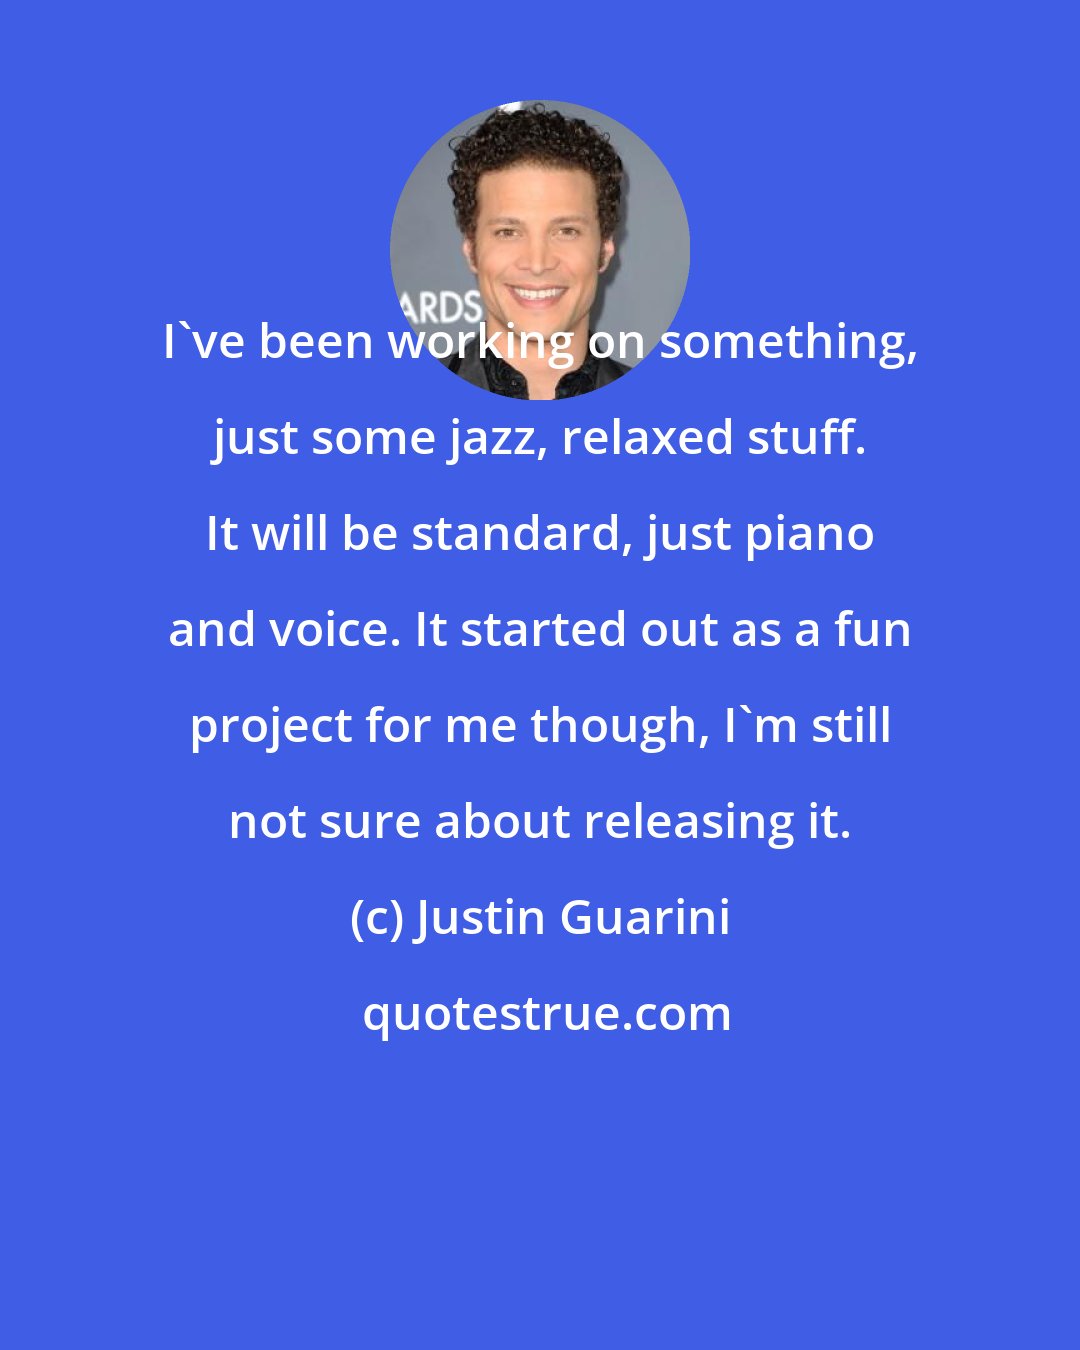 Justin Guarini: I've been working on something, just some jazz, relaxed stuff. It will be standard, just piano and voice. It started out as a fun project for me though, I'm still not sure about releasing it.